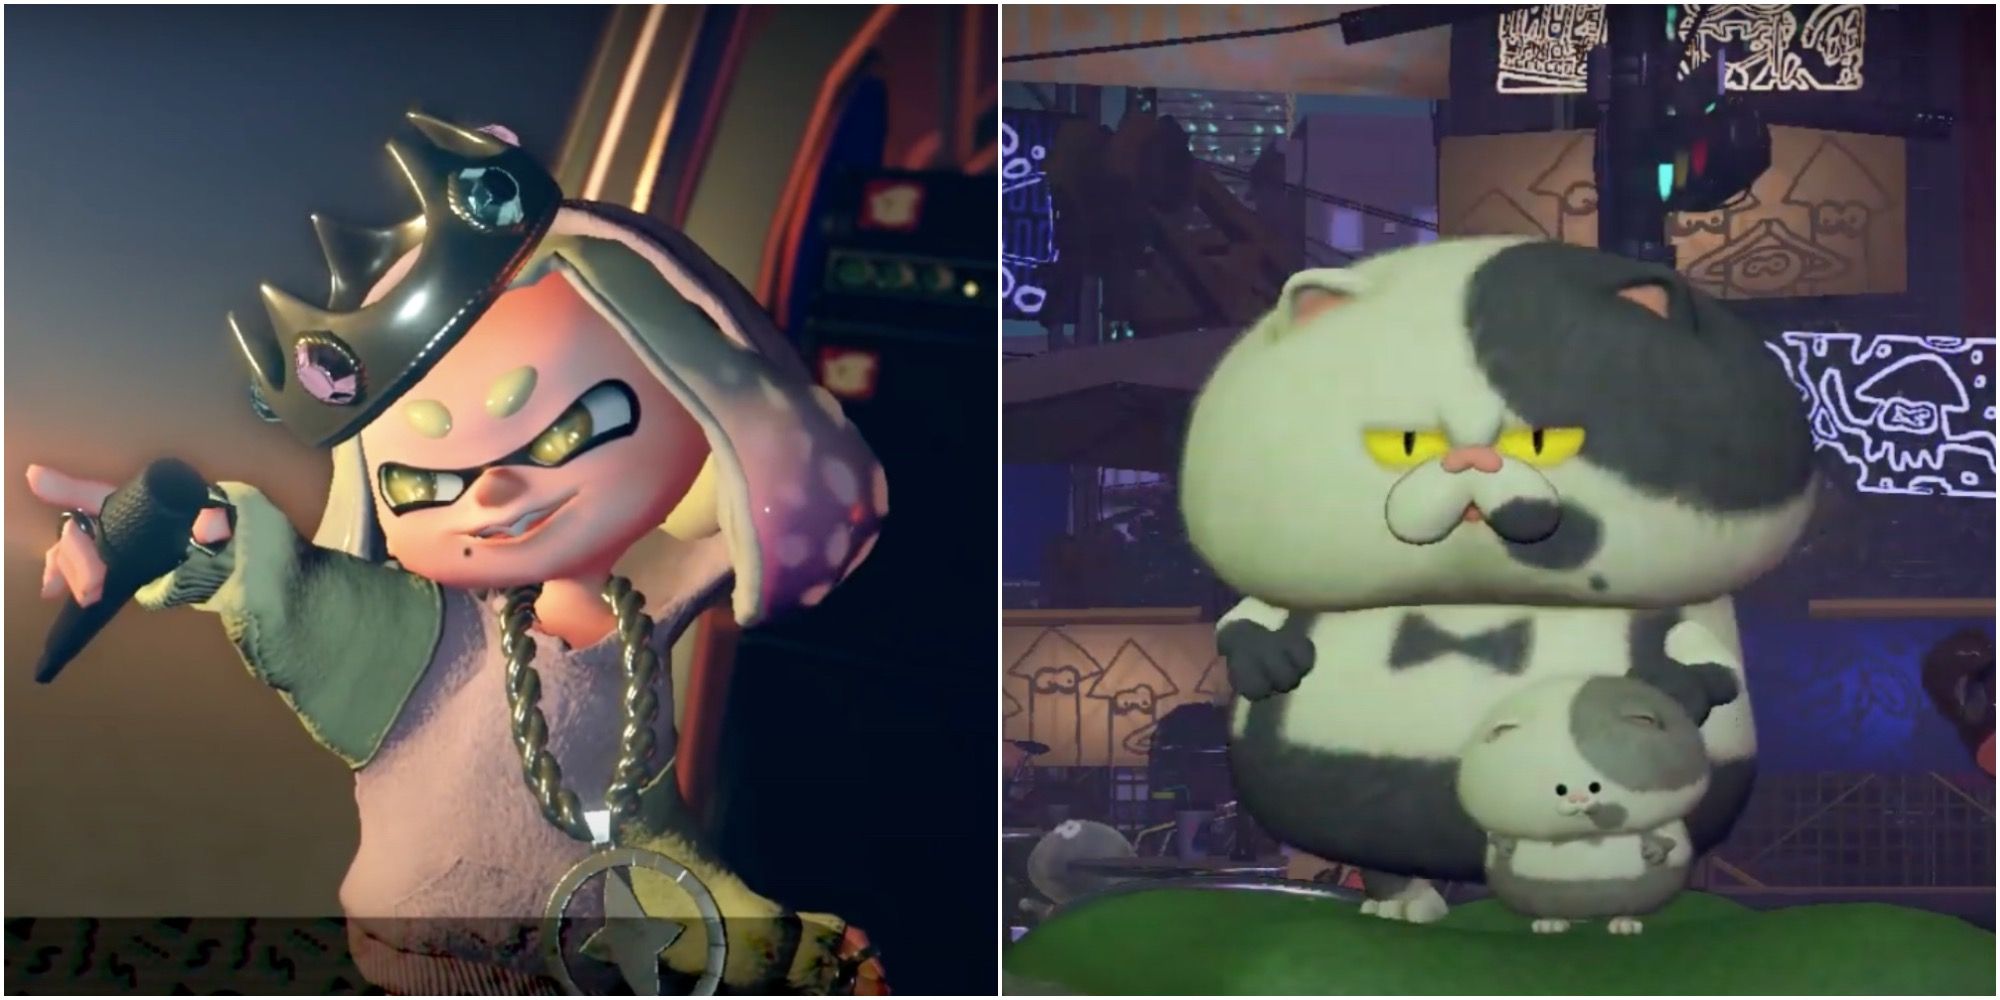 judd and pearl in splatoon games